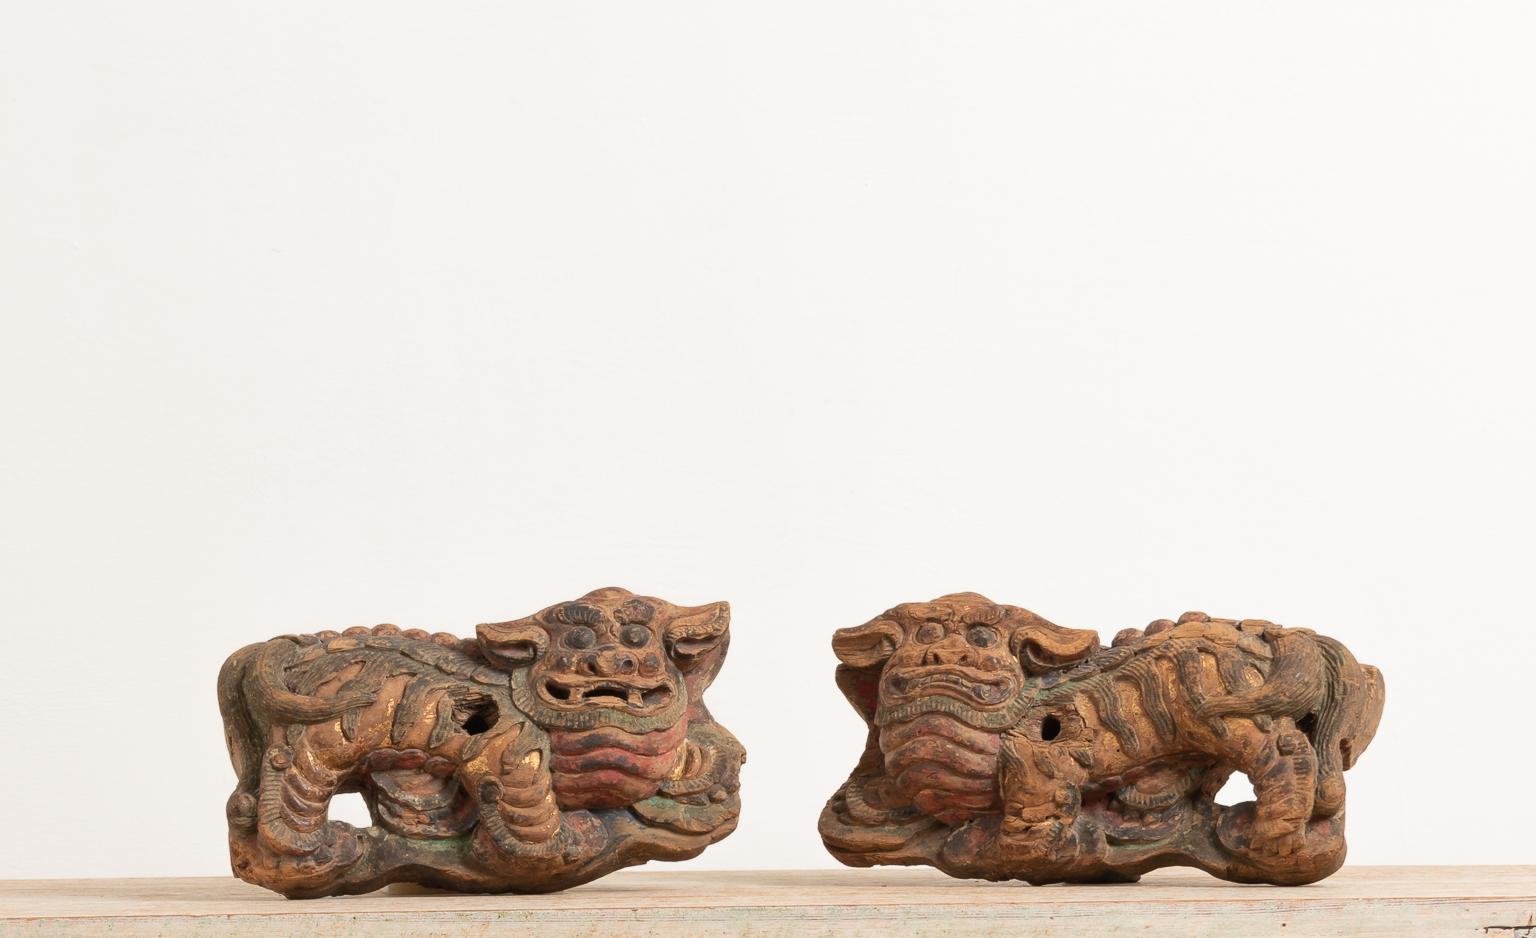 Chinese guardian lions in original condition. The lions are made from wood and were handmade sometime during the 19th century in China. The guardian lions are sometimes referred to as foo dogs or lion dogs and are thought to ward off evil sprits and